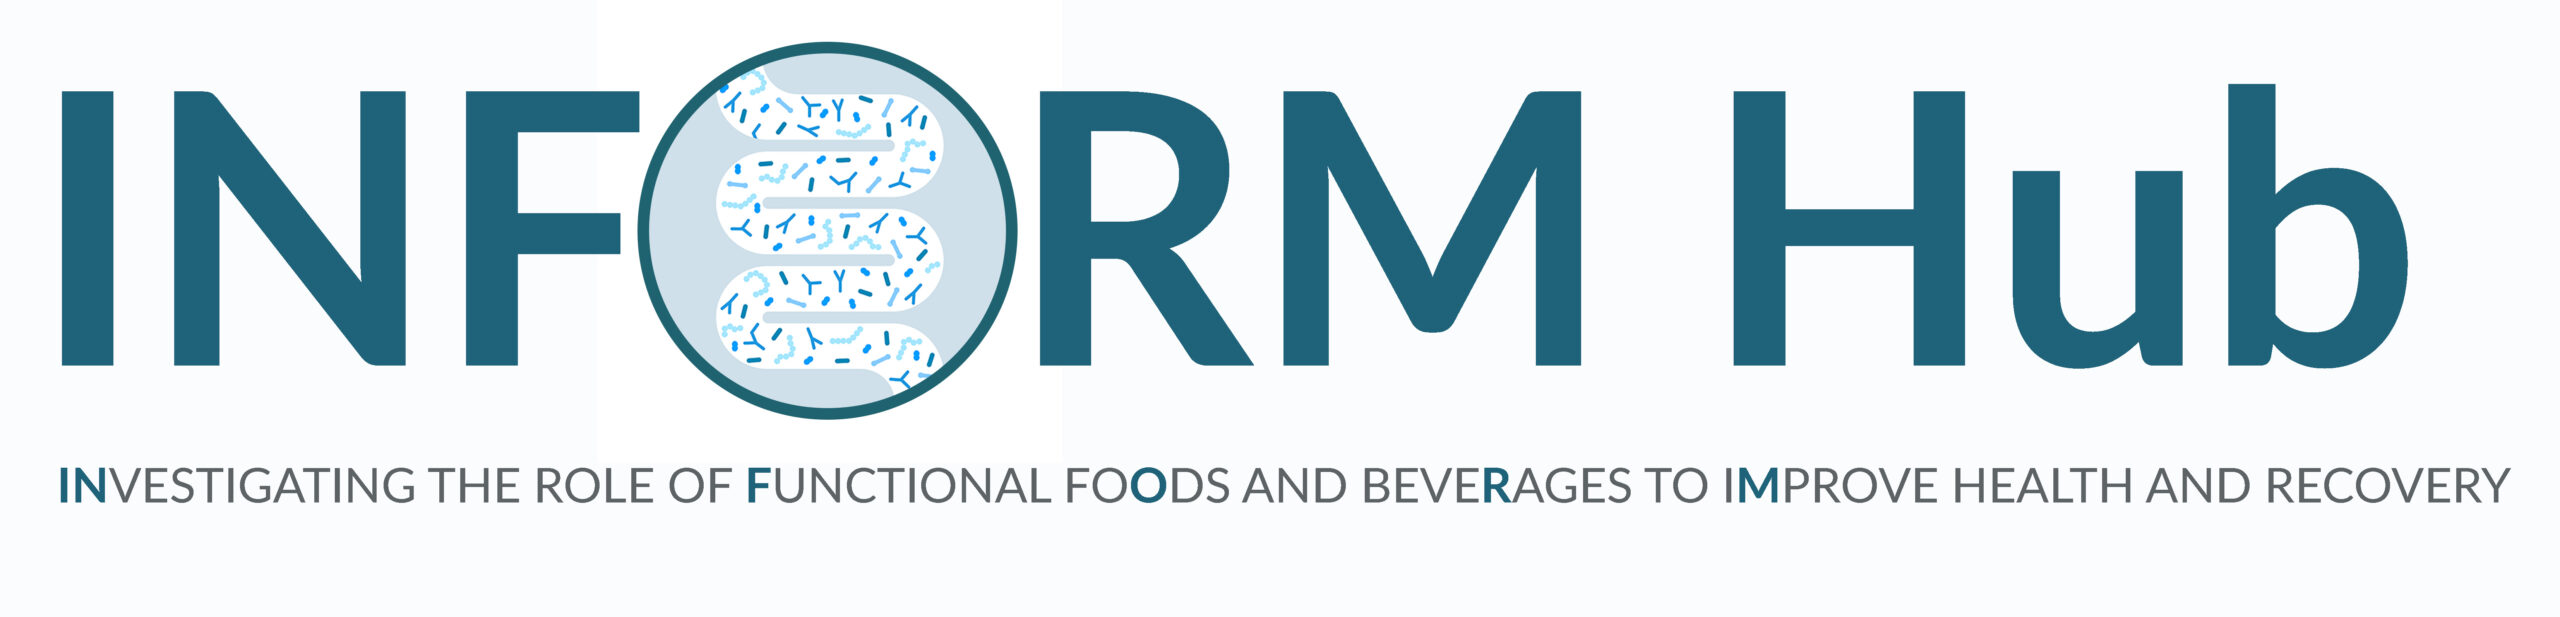 INFORM Innovation Hub (Investigating the role of Functional foOds and beveRages to iMprove health and Recovery)